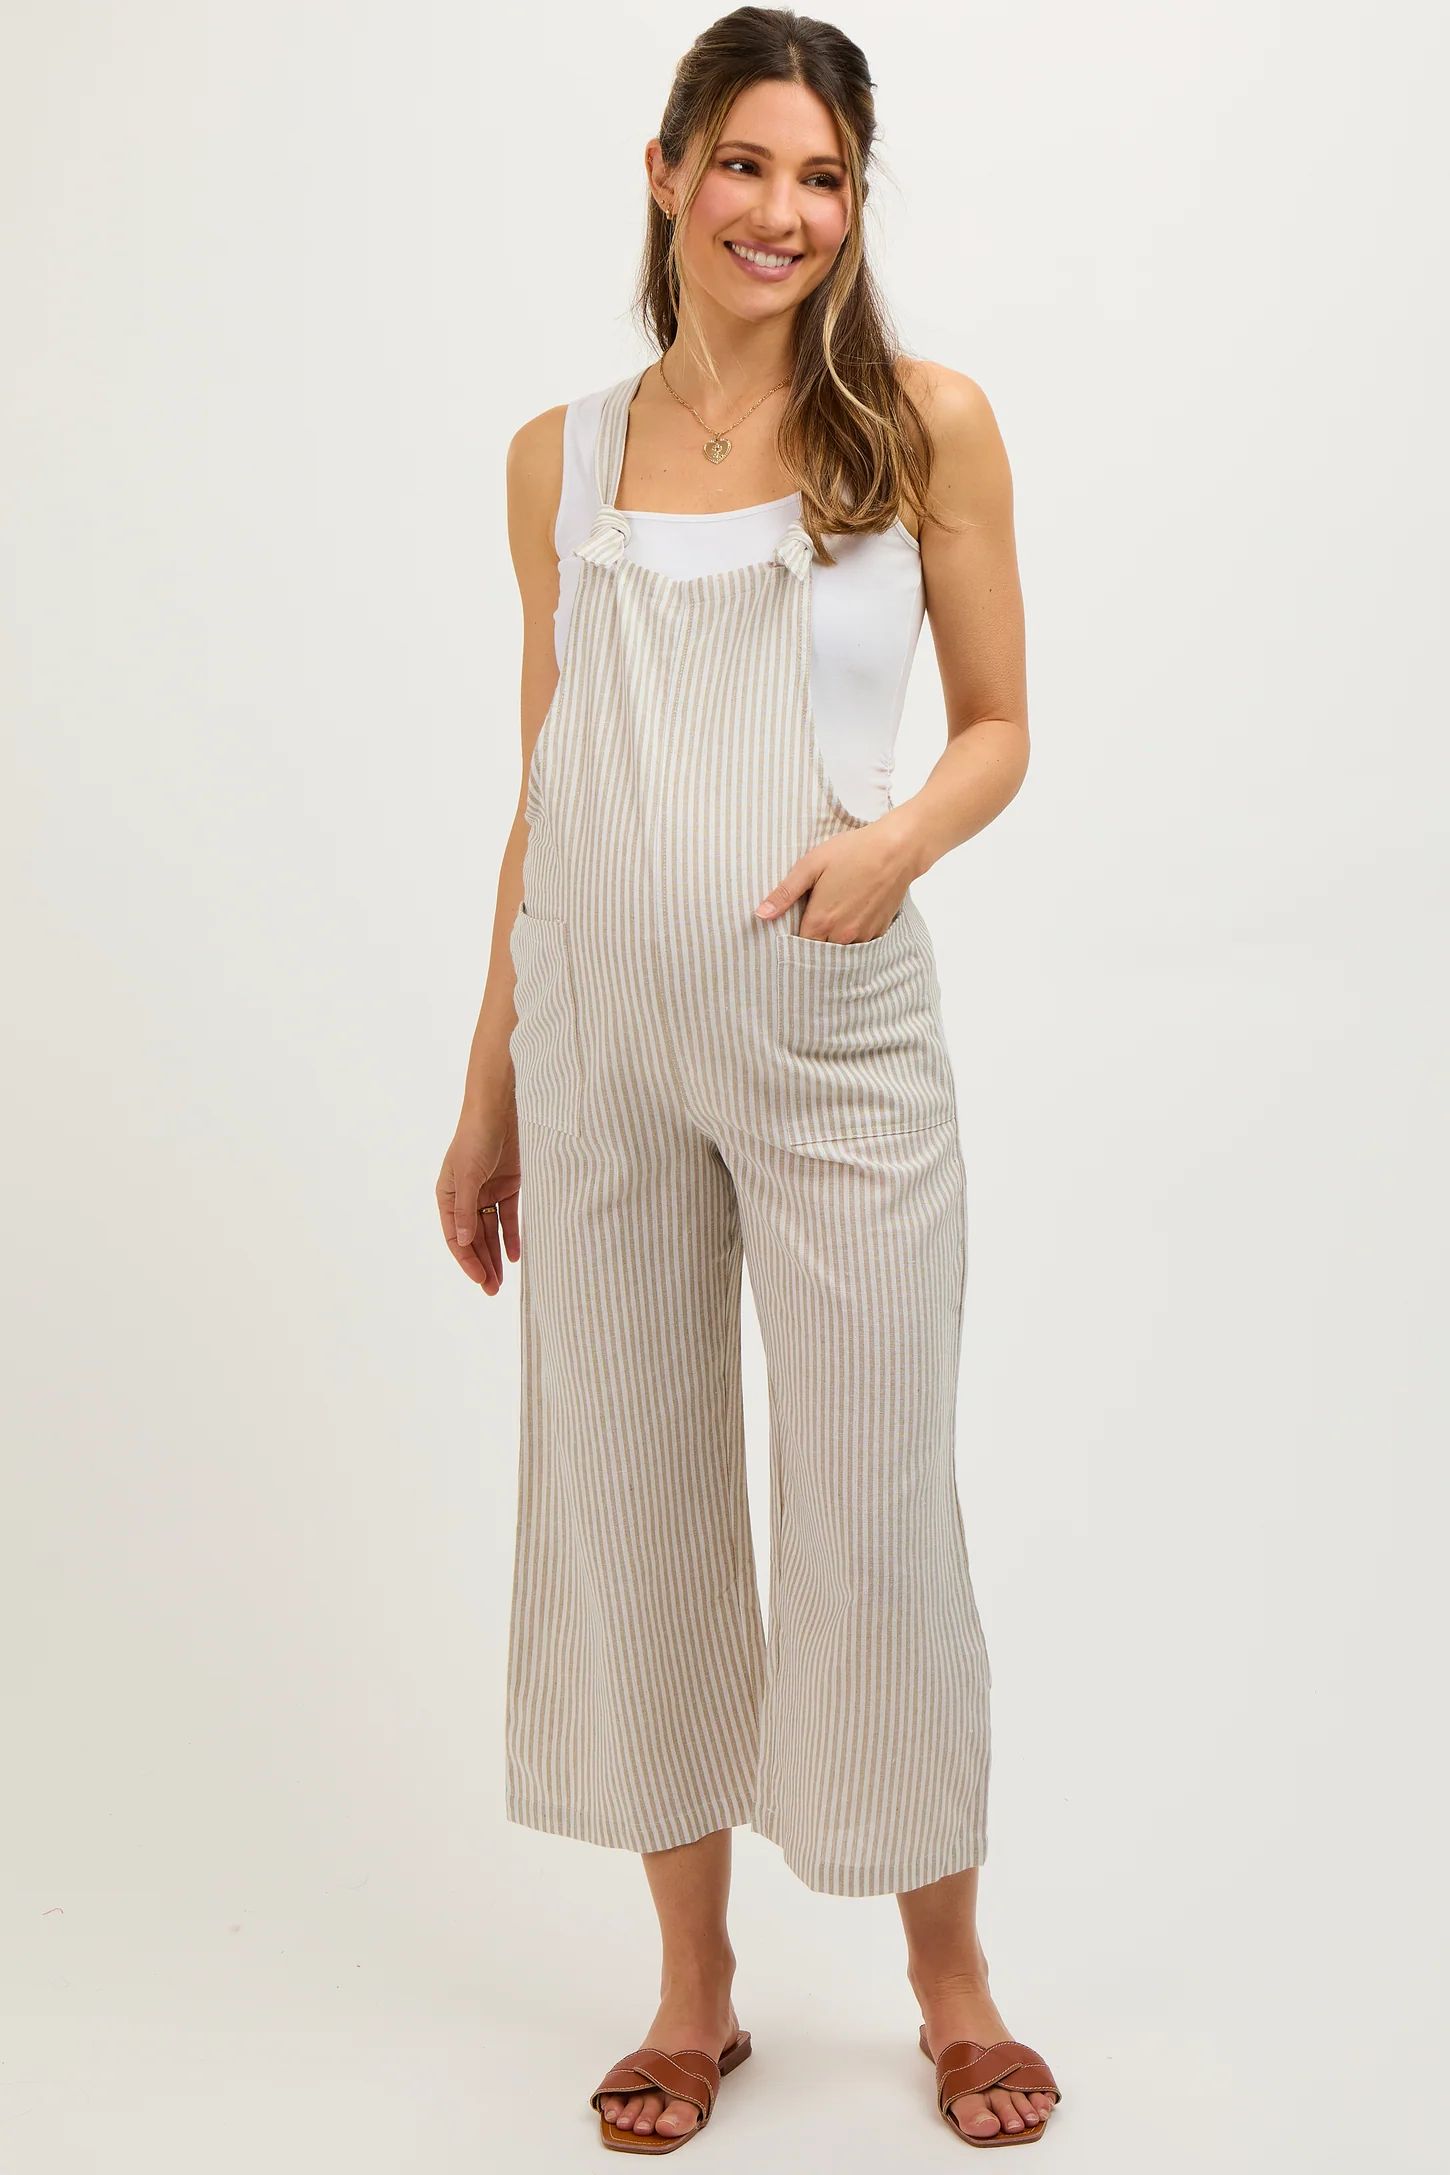 Taupe Striped Linen Maternity Overalls | PinkBlush Maternity